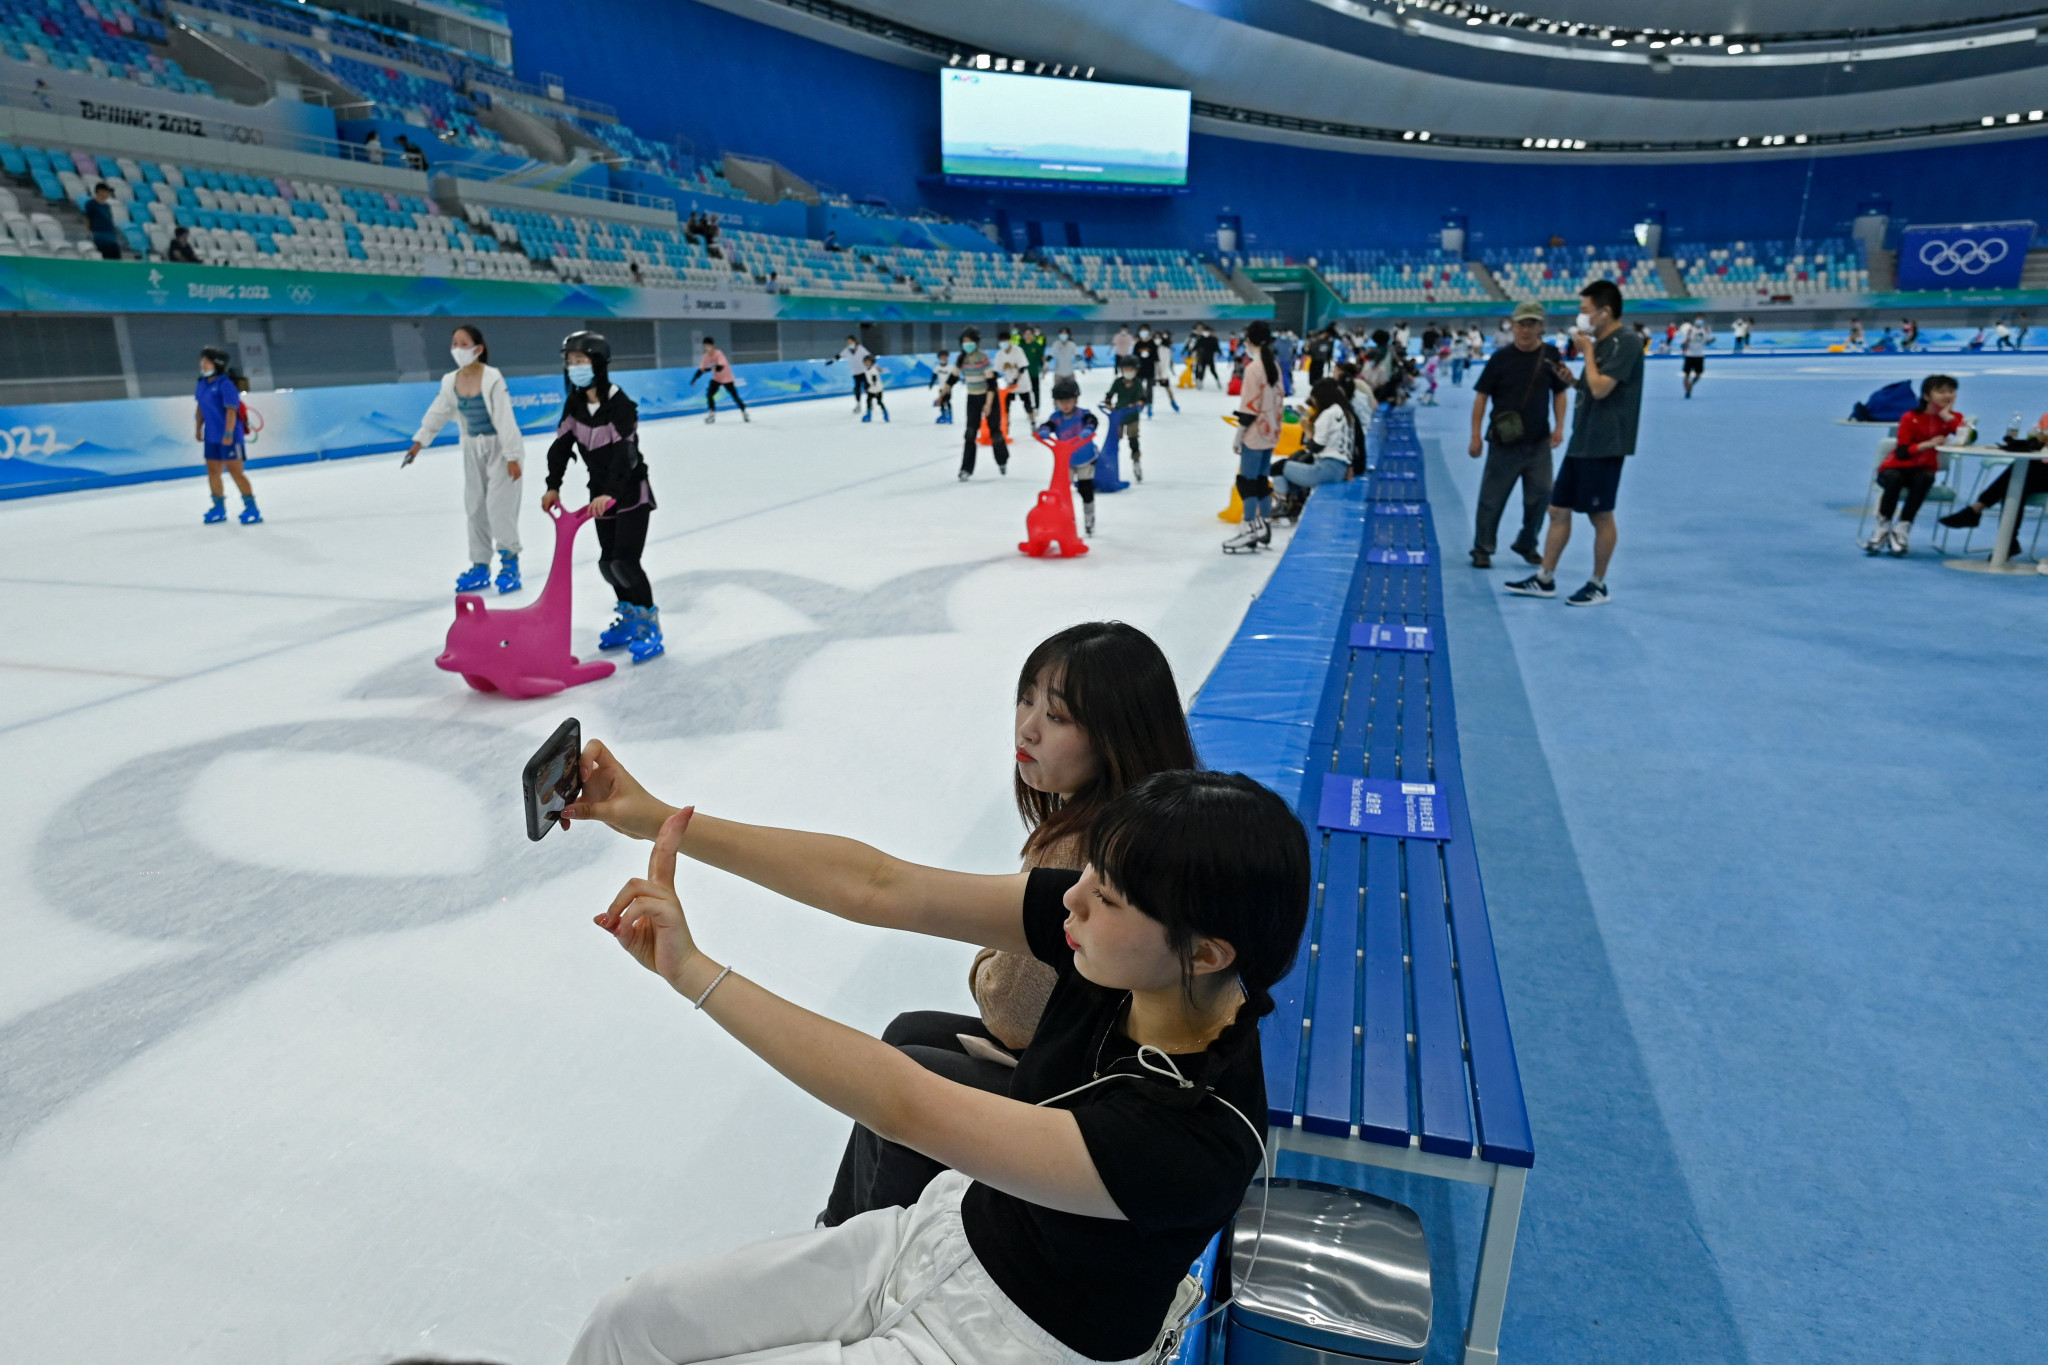 Chinese authorities claim 210,000 people have visited Beijing's Ice Ribbon since it opened to the public ©Getty Images